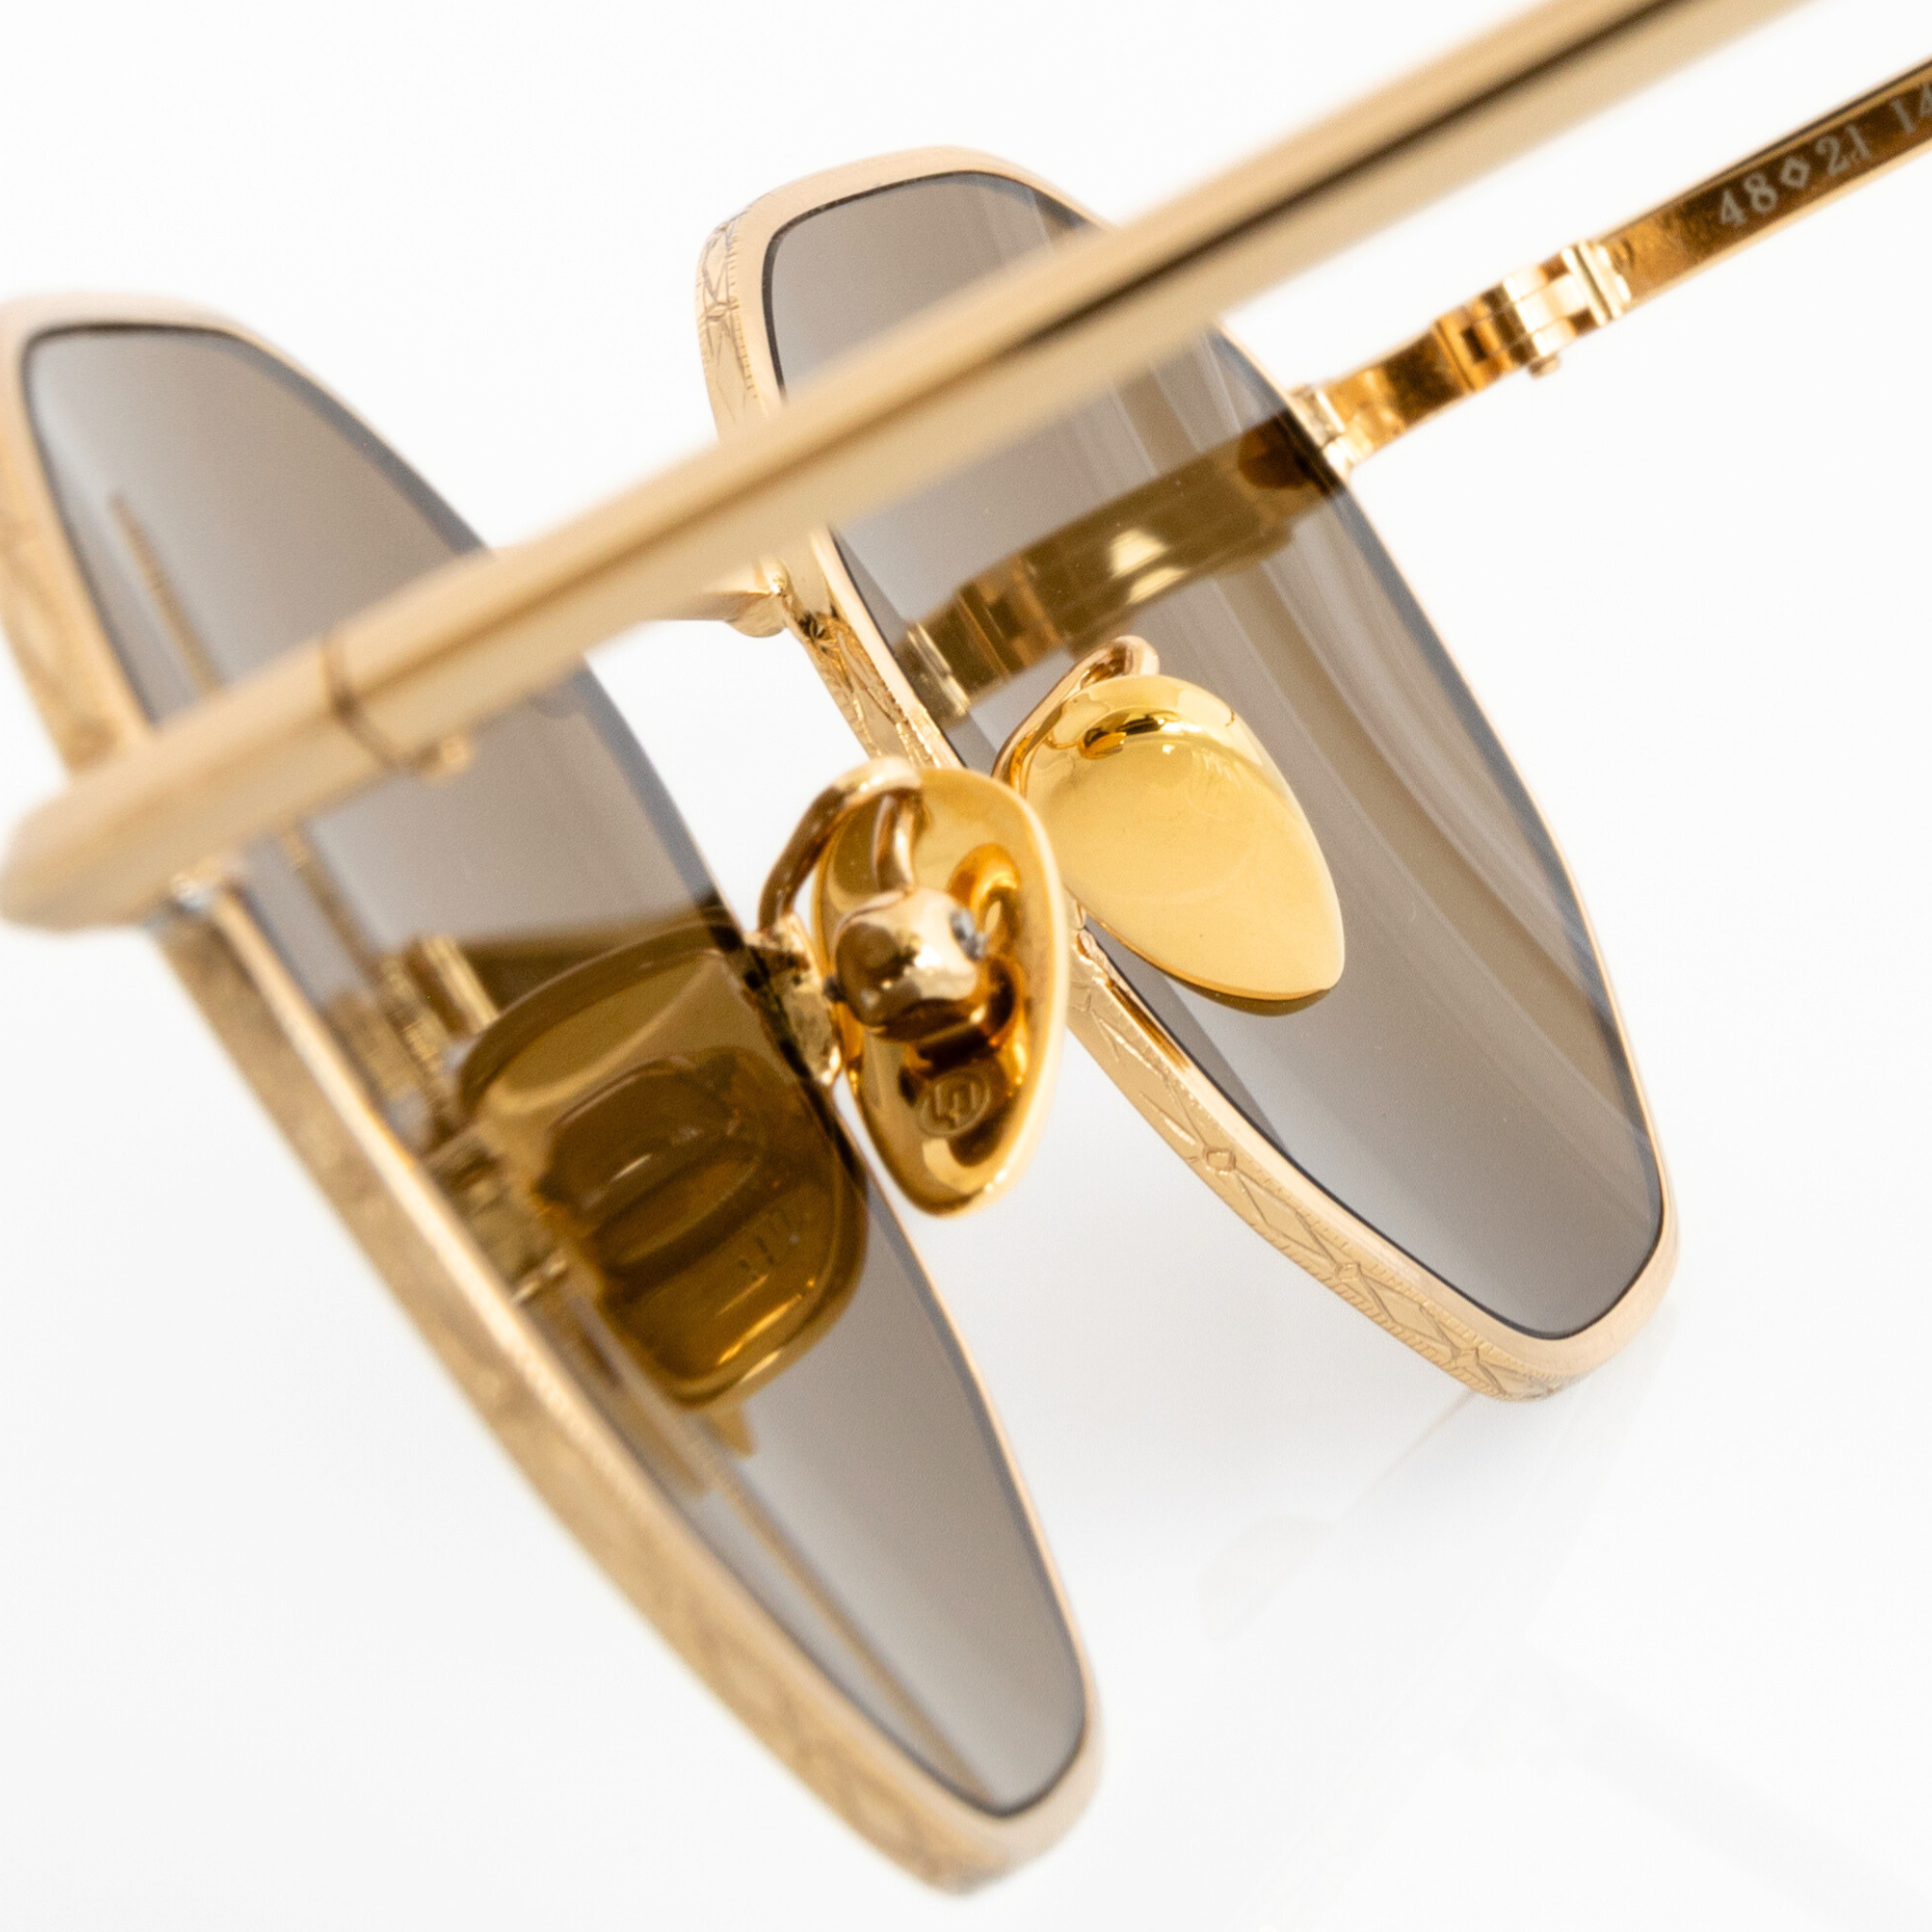 close-up view of gold metallic ceramic nose pads on Memorí small fit hexagon sunglasses. The nose pads are adjustable to fit different nose shapes and sizes.  